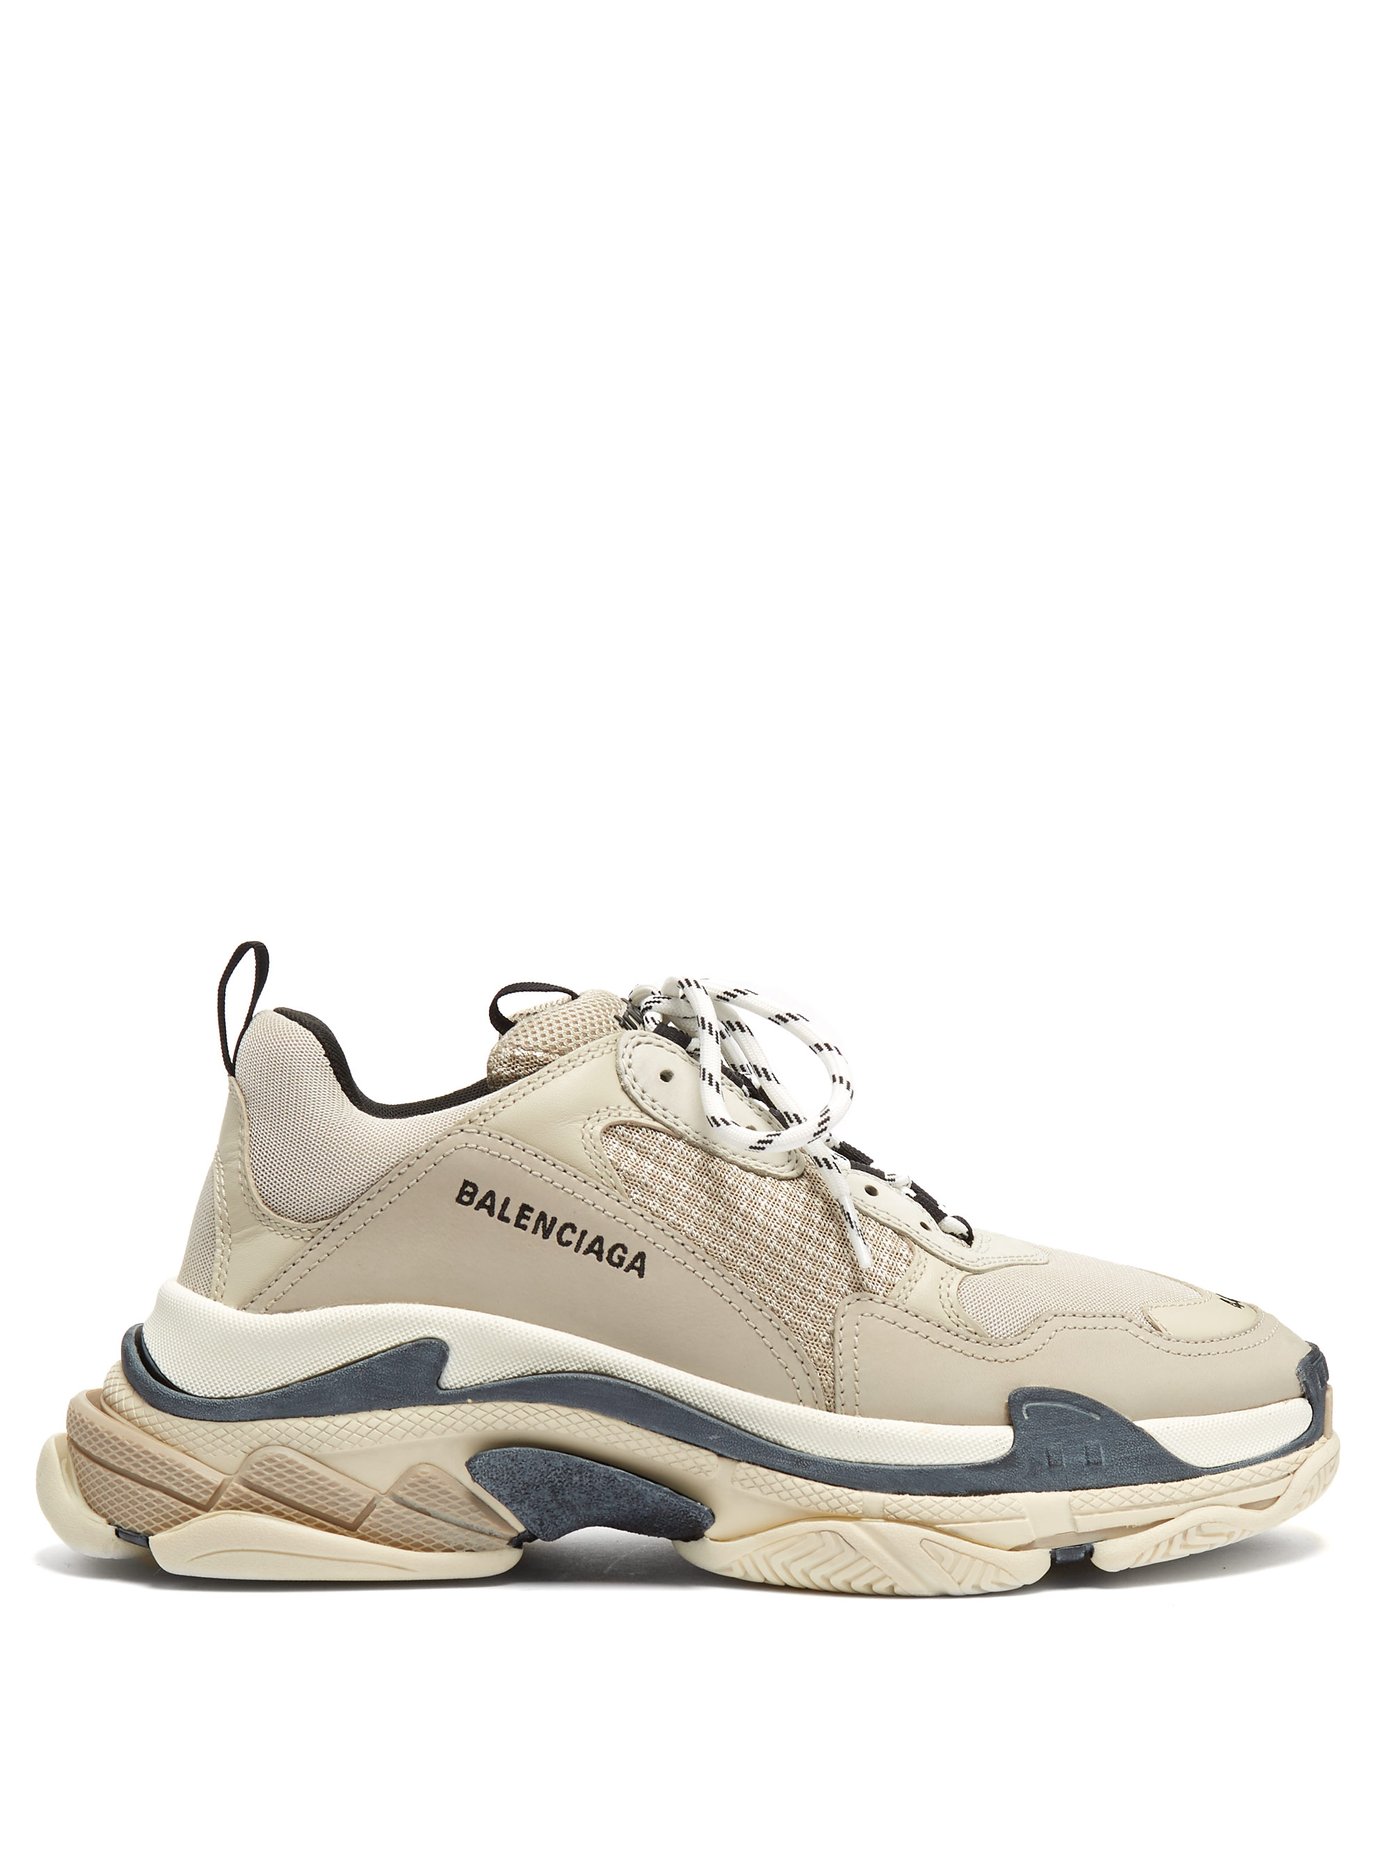 Balenciaga launches 6 new Triple S colorways nss magazine